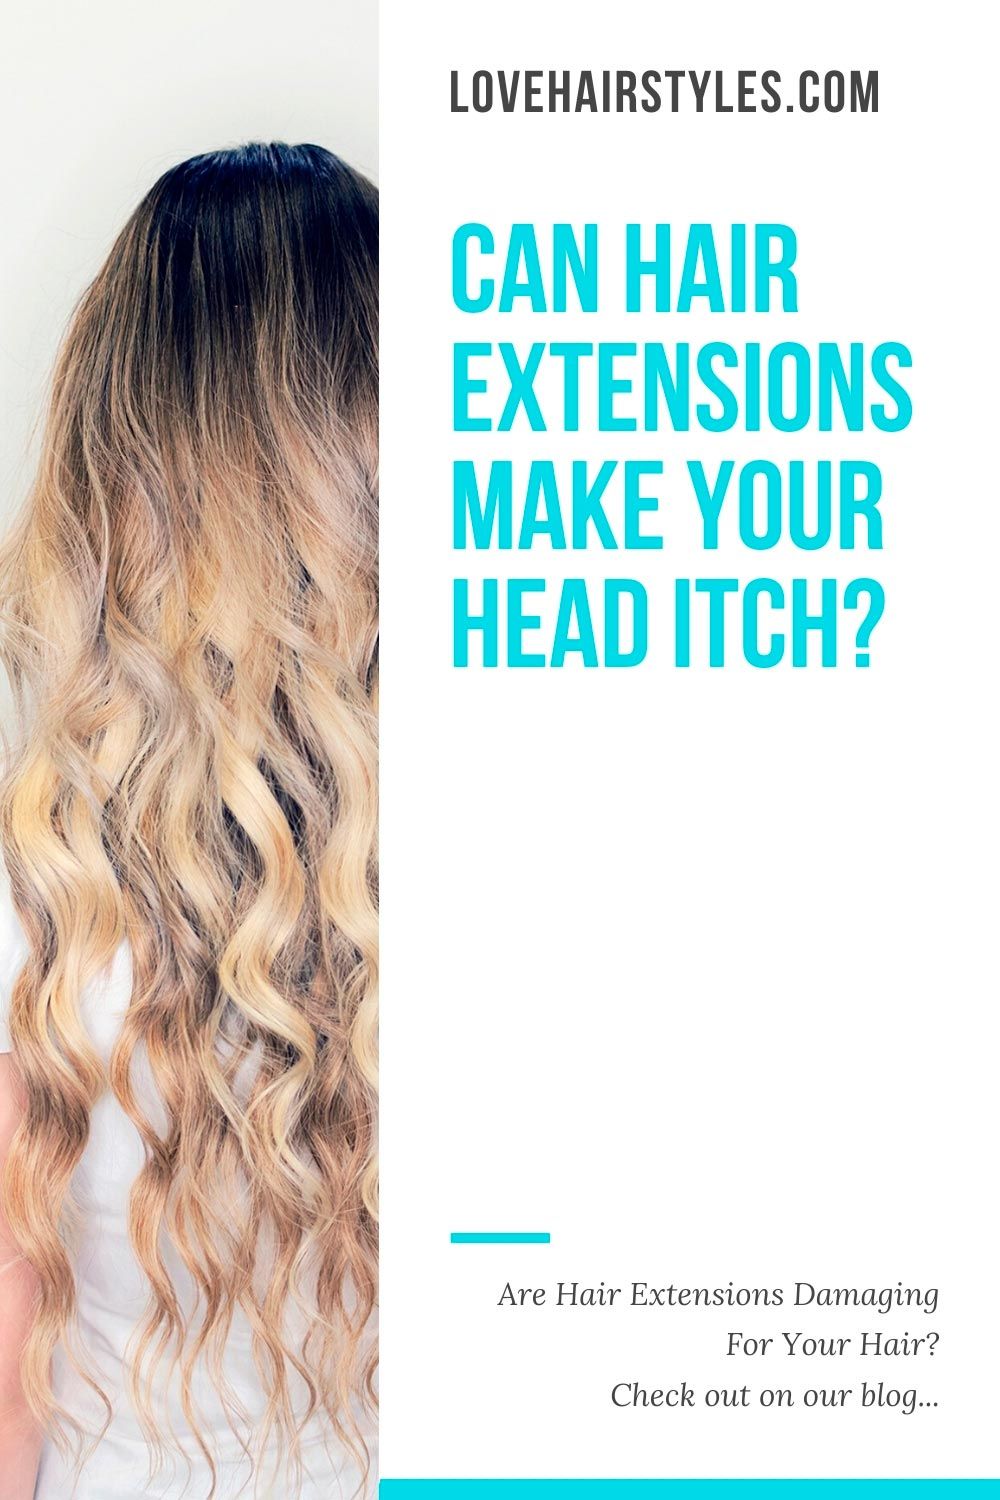 Are Hair Extensions Damaging For Your Hair?